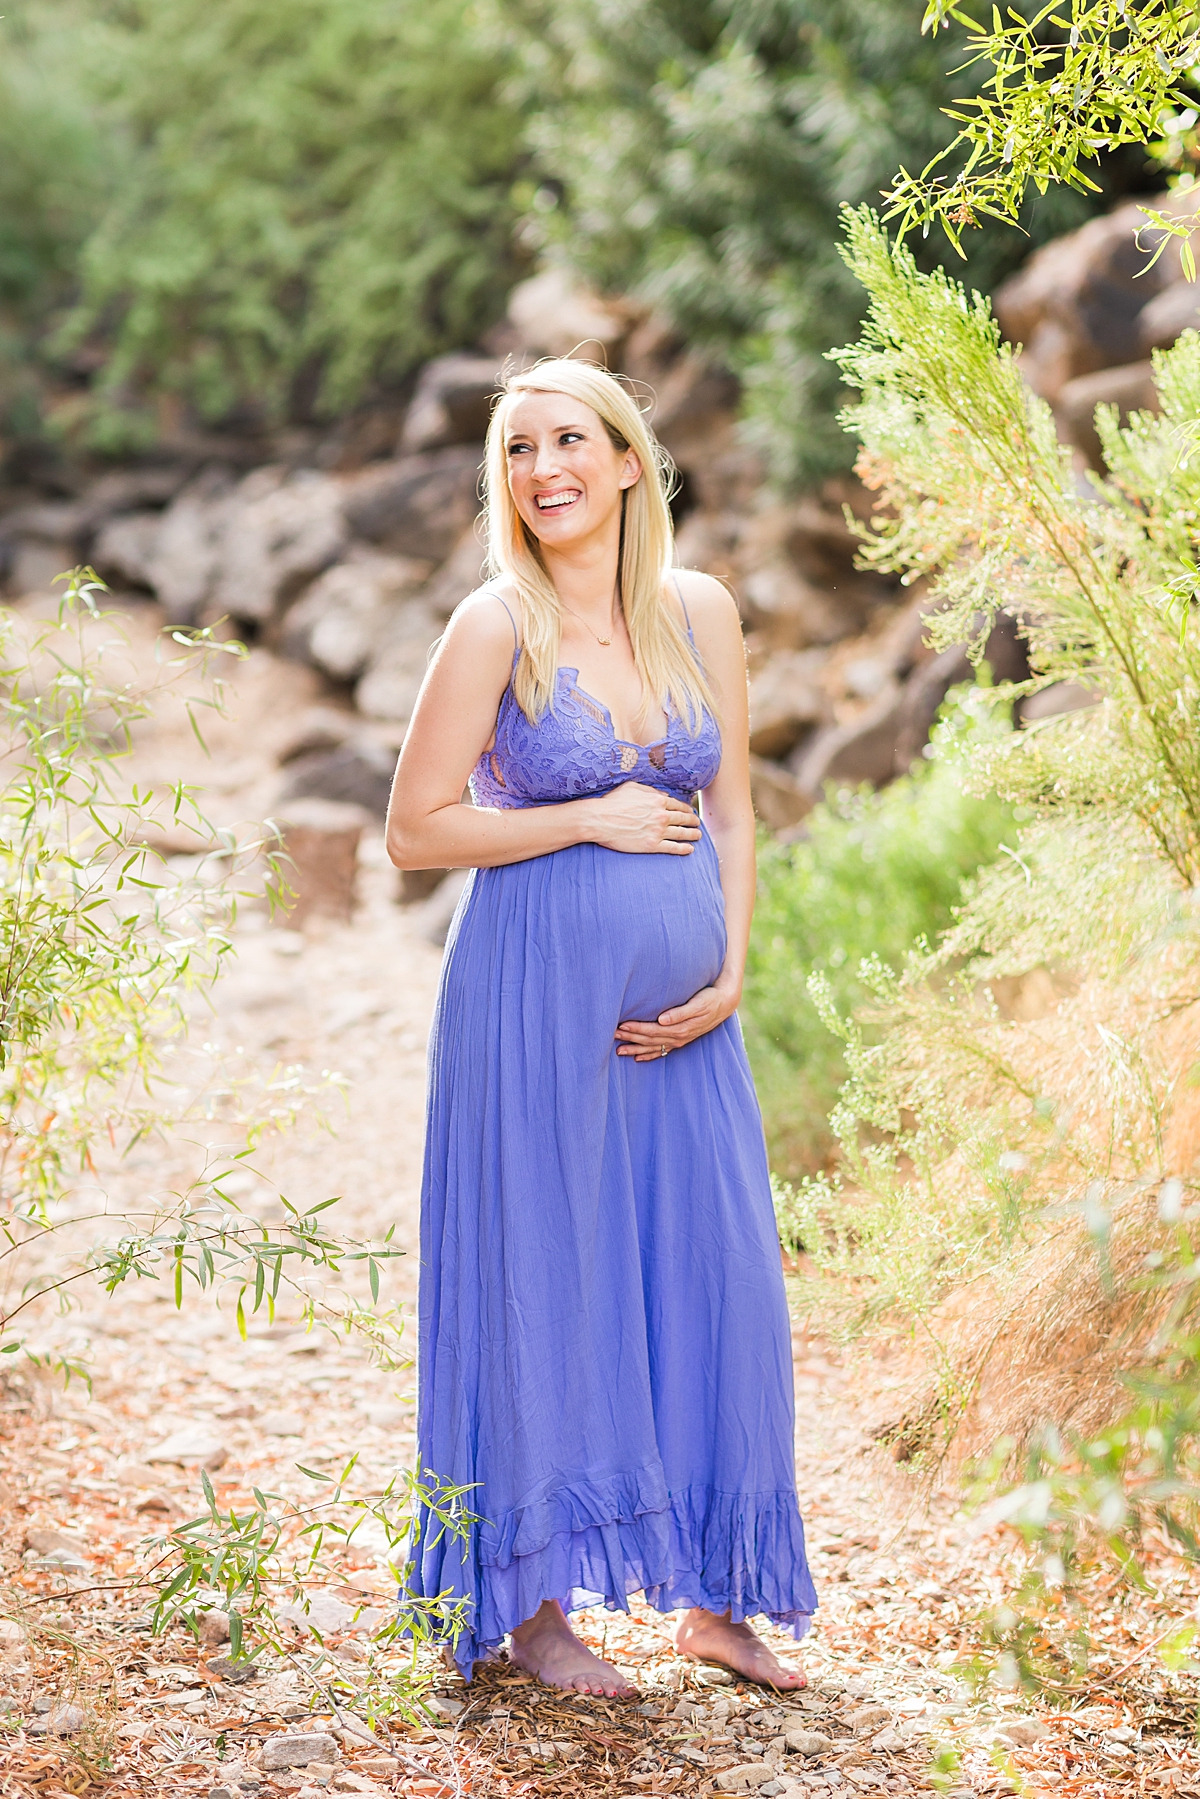 Leah Hope Photography | Scottsdale Arizona Maternity Photographer | Phoenix Arizona Pregnancy Pictures | Natural Light Photography | What to Wear | How to Pose | Maternity Poses | Styling Fashion for Pictures | Maternity Photos | Maternity Posing Ideas | Pregnancy Photo Shoot Outfit Inspiration | Outfits and Styling Ideas | Maternity Poses | Maternity Photos | Bump Pictures | Baby Bump